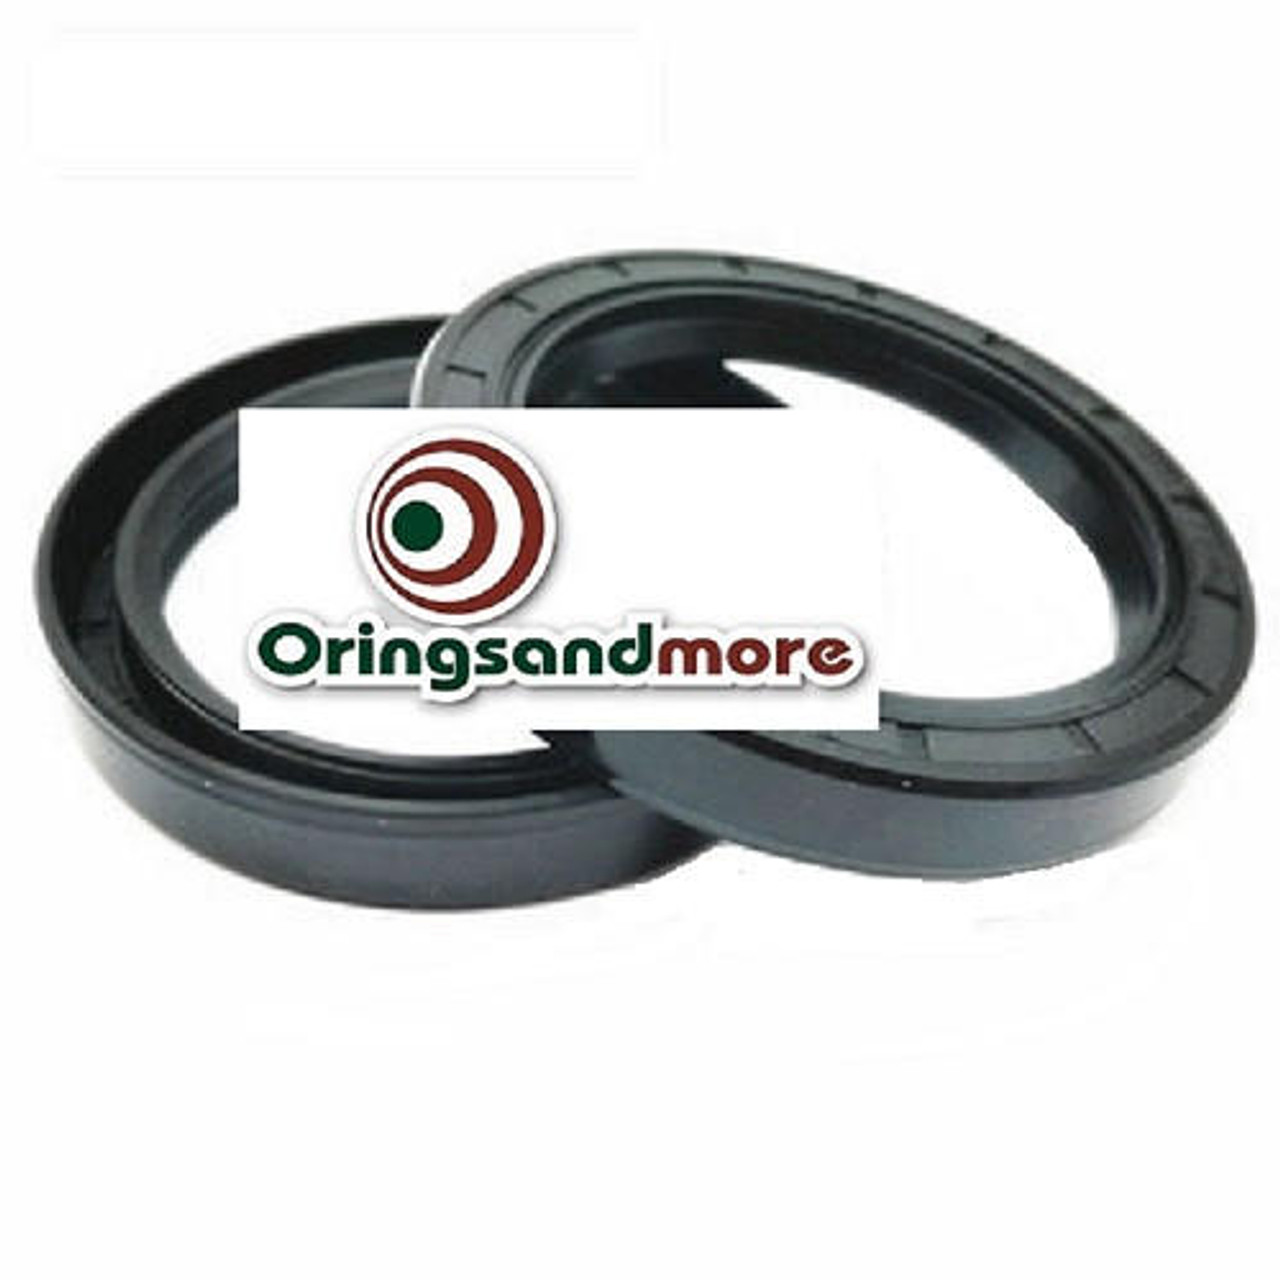 Metric Oil Shaft Seal 25 x 46 x 7mm Double Lip  Price for 1 pc